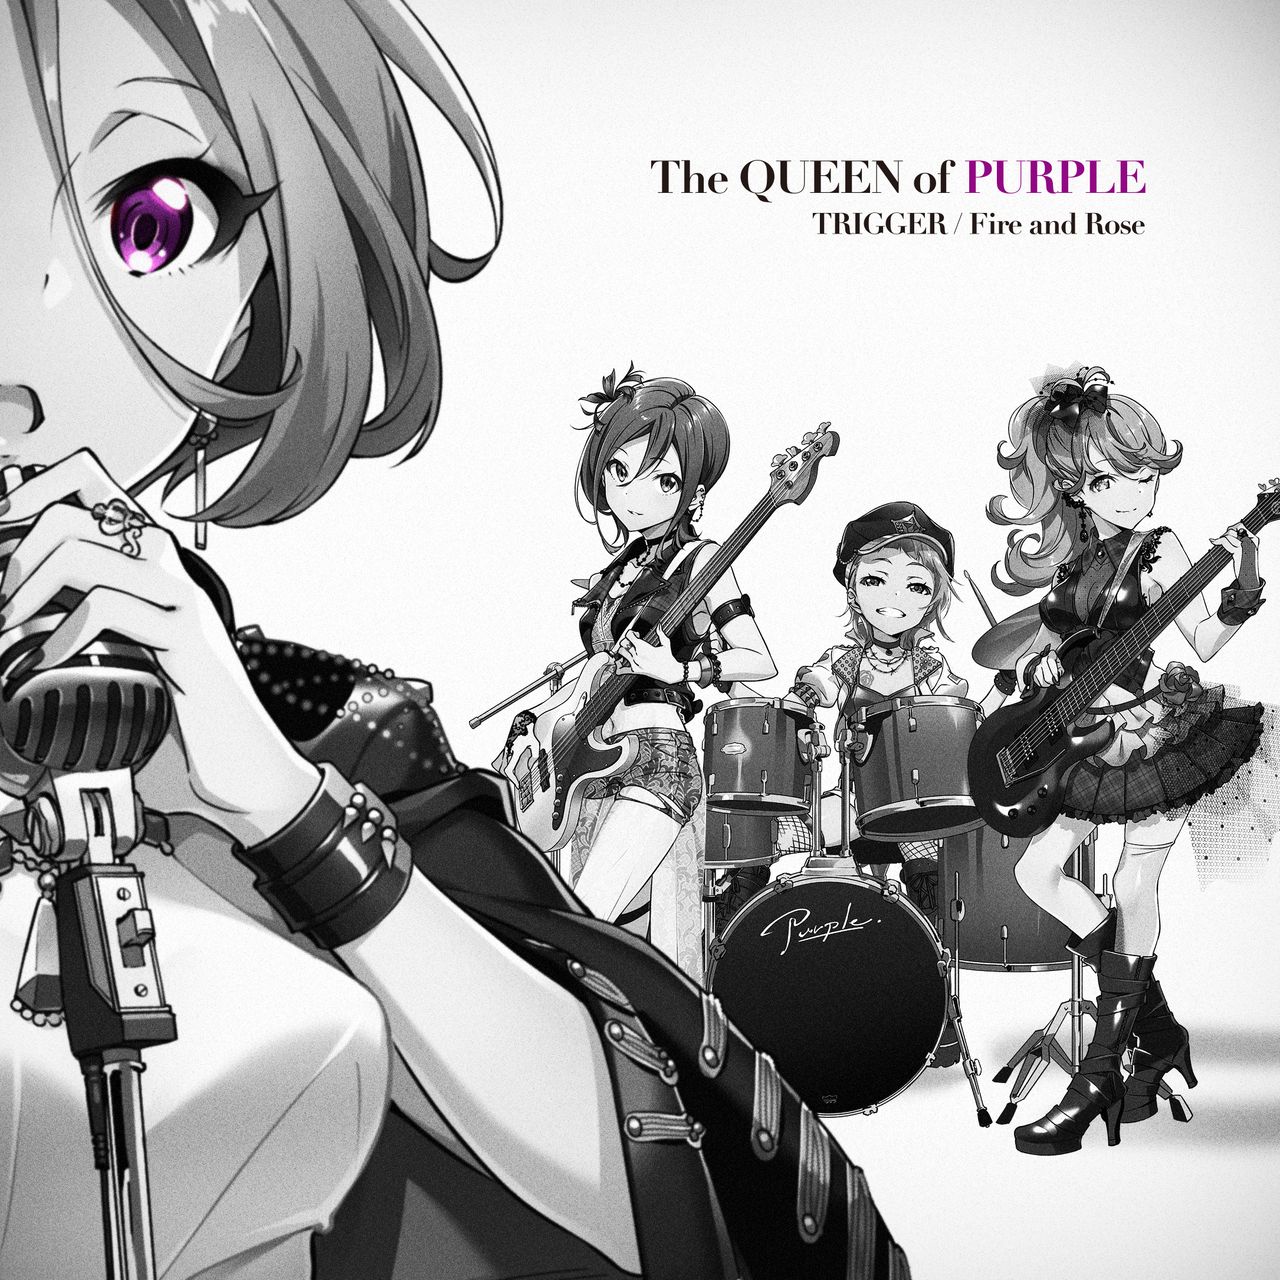  The QUEEN of PURPLE「TRIGGER / Fire and Rose」Trailer